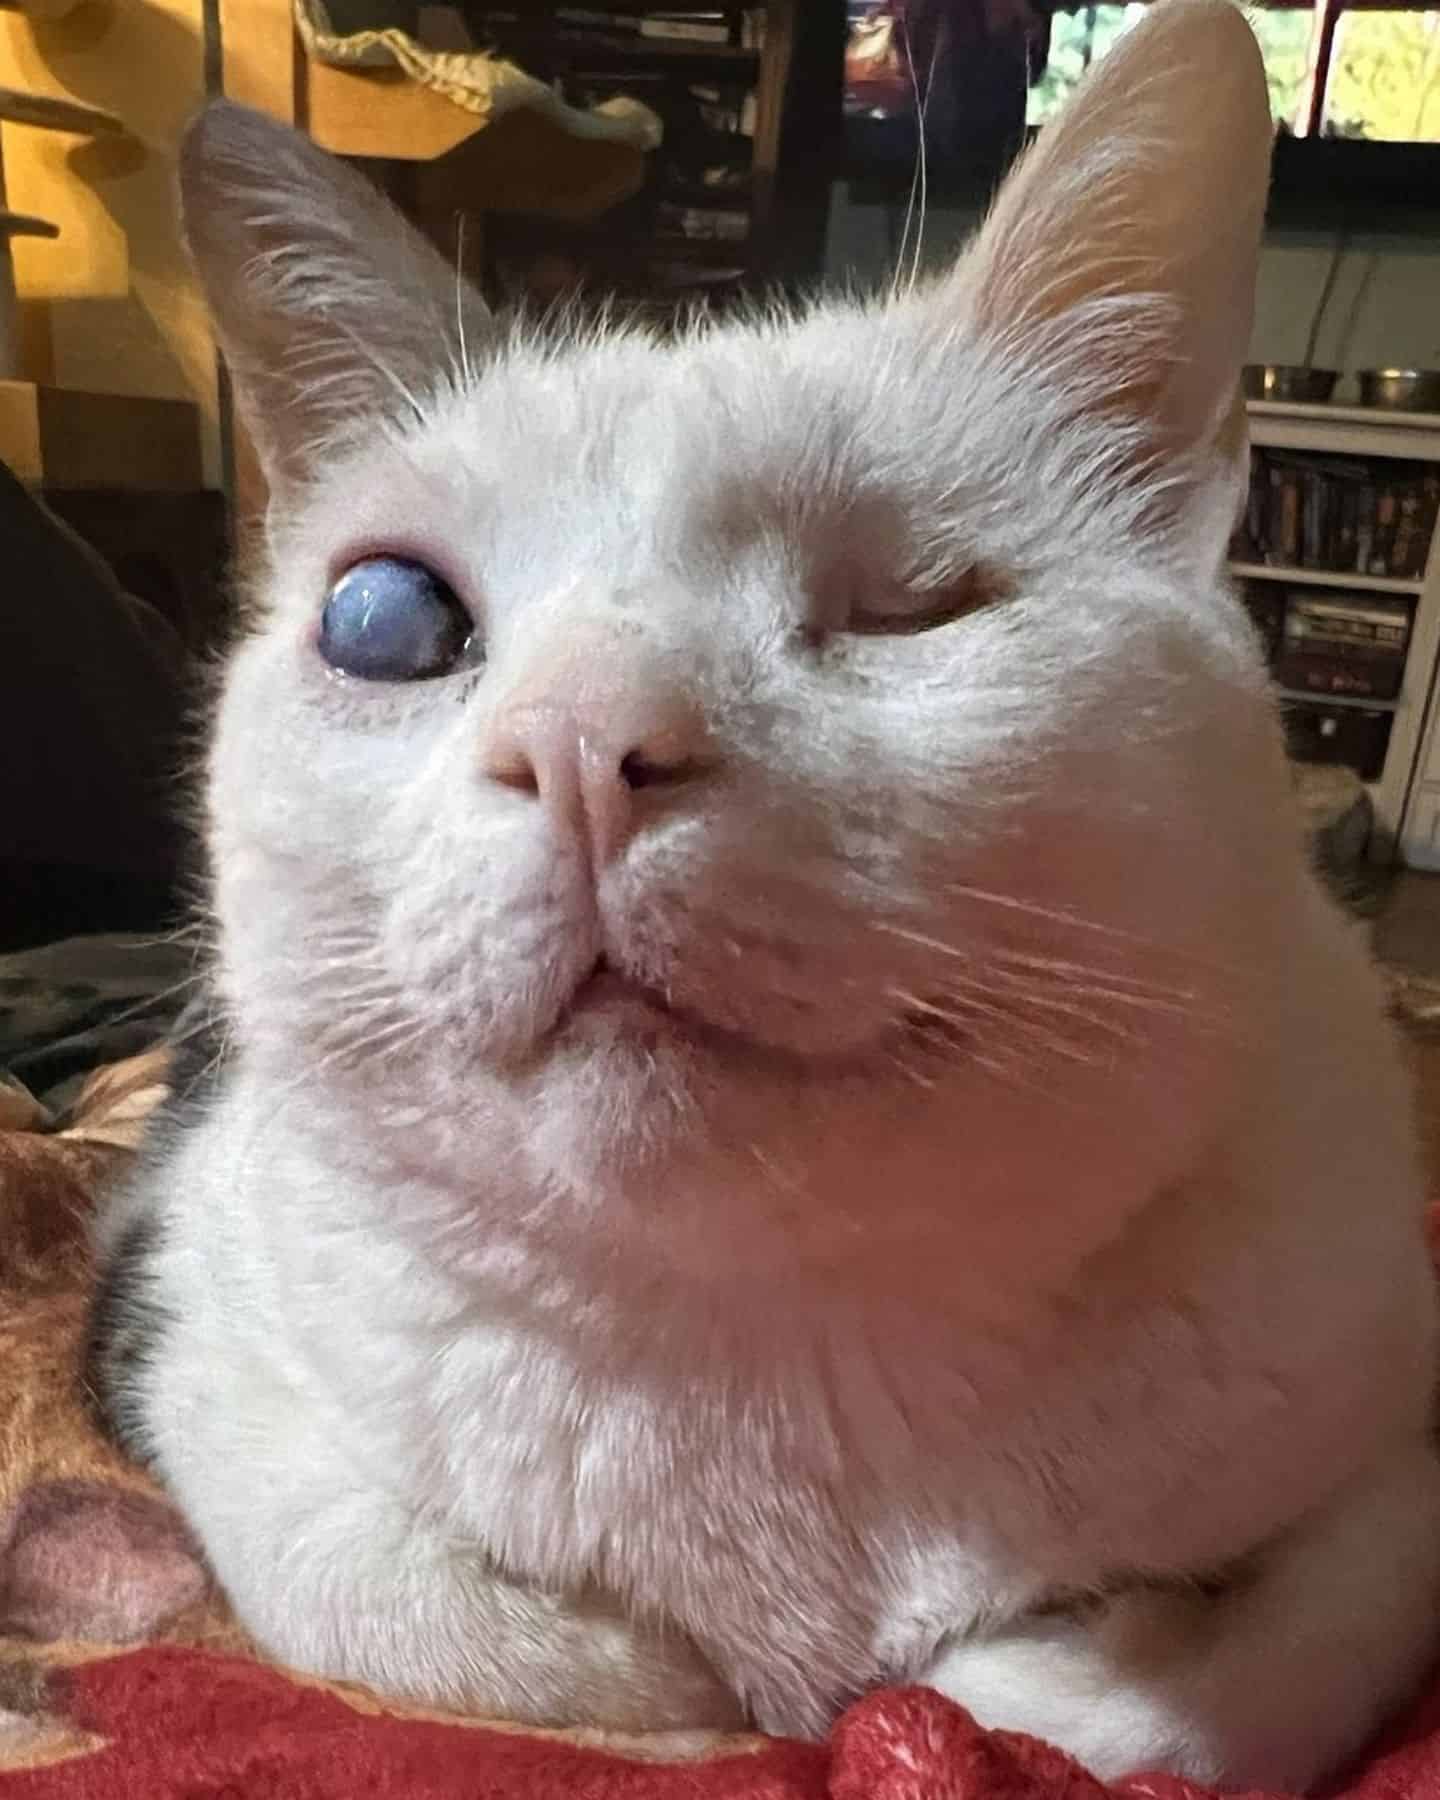 close-up photo of a blind cat